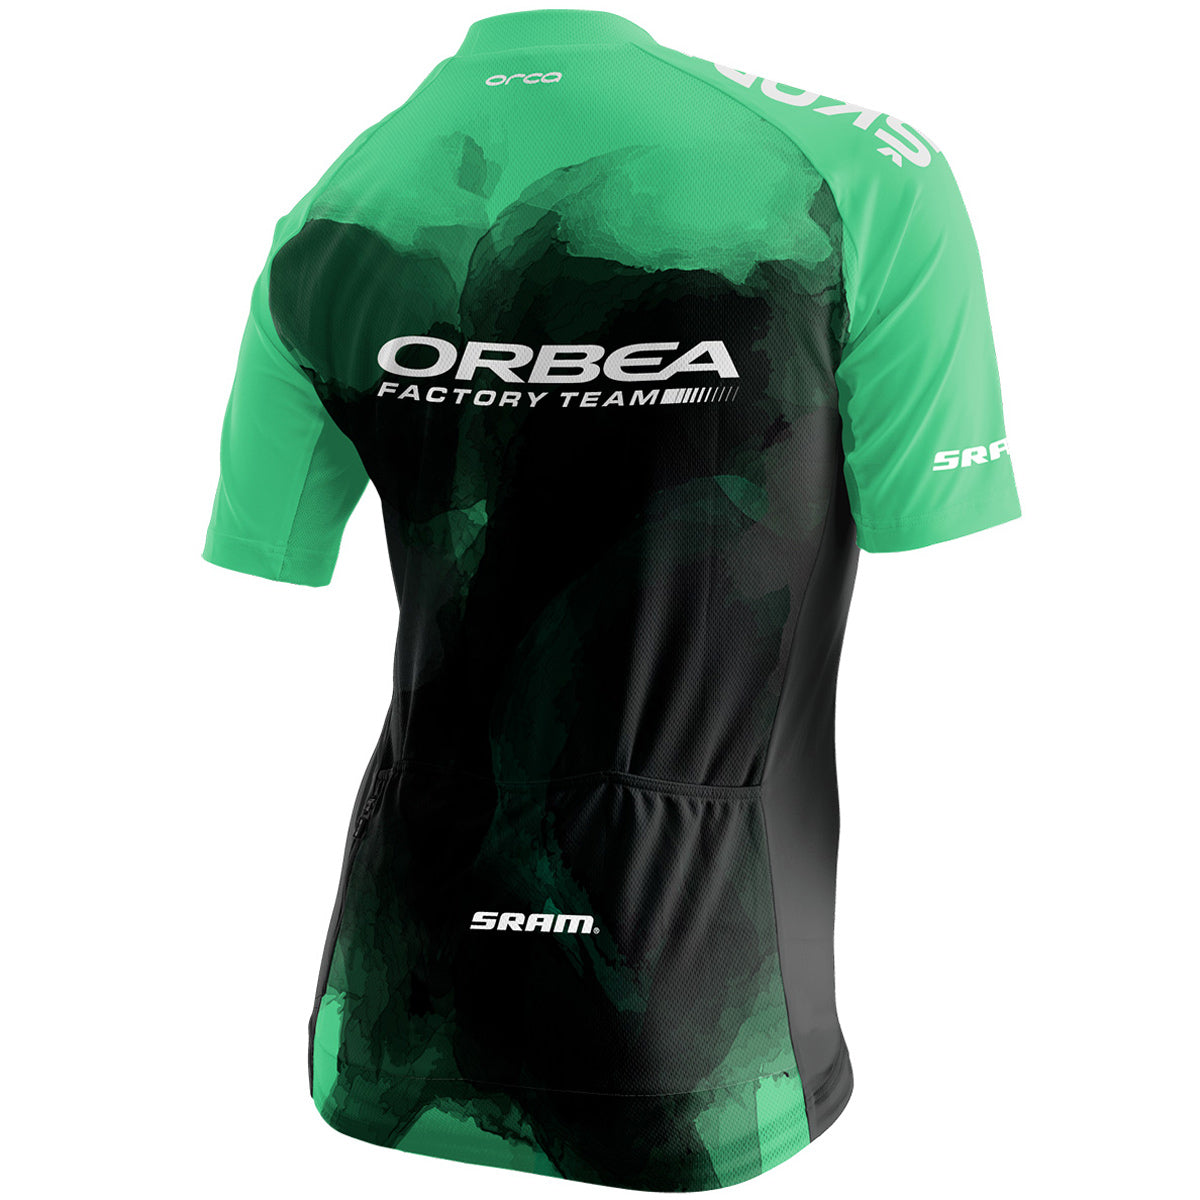 Maillot mujer Orbea Factory Team | All4cycling